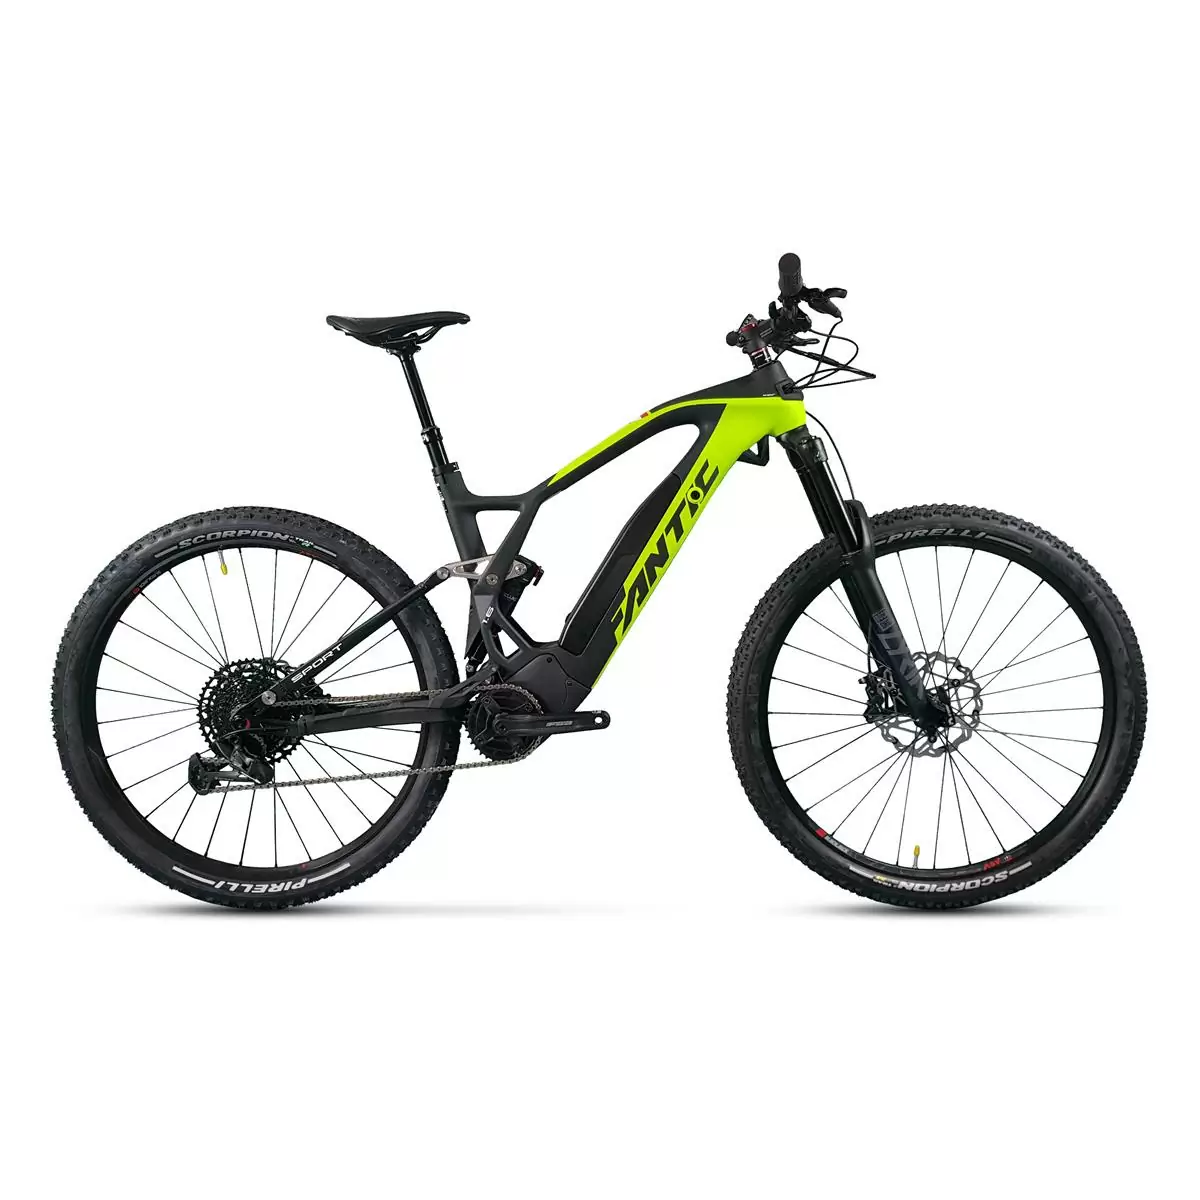 Integra XTF 1.6 Carbon Sport 29'' 160mm 12s 720wh Brose S-MAG Lime 2023 Size S - image